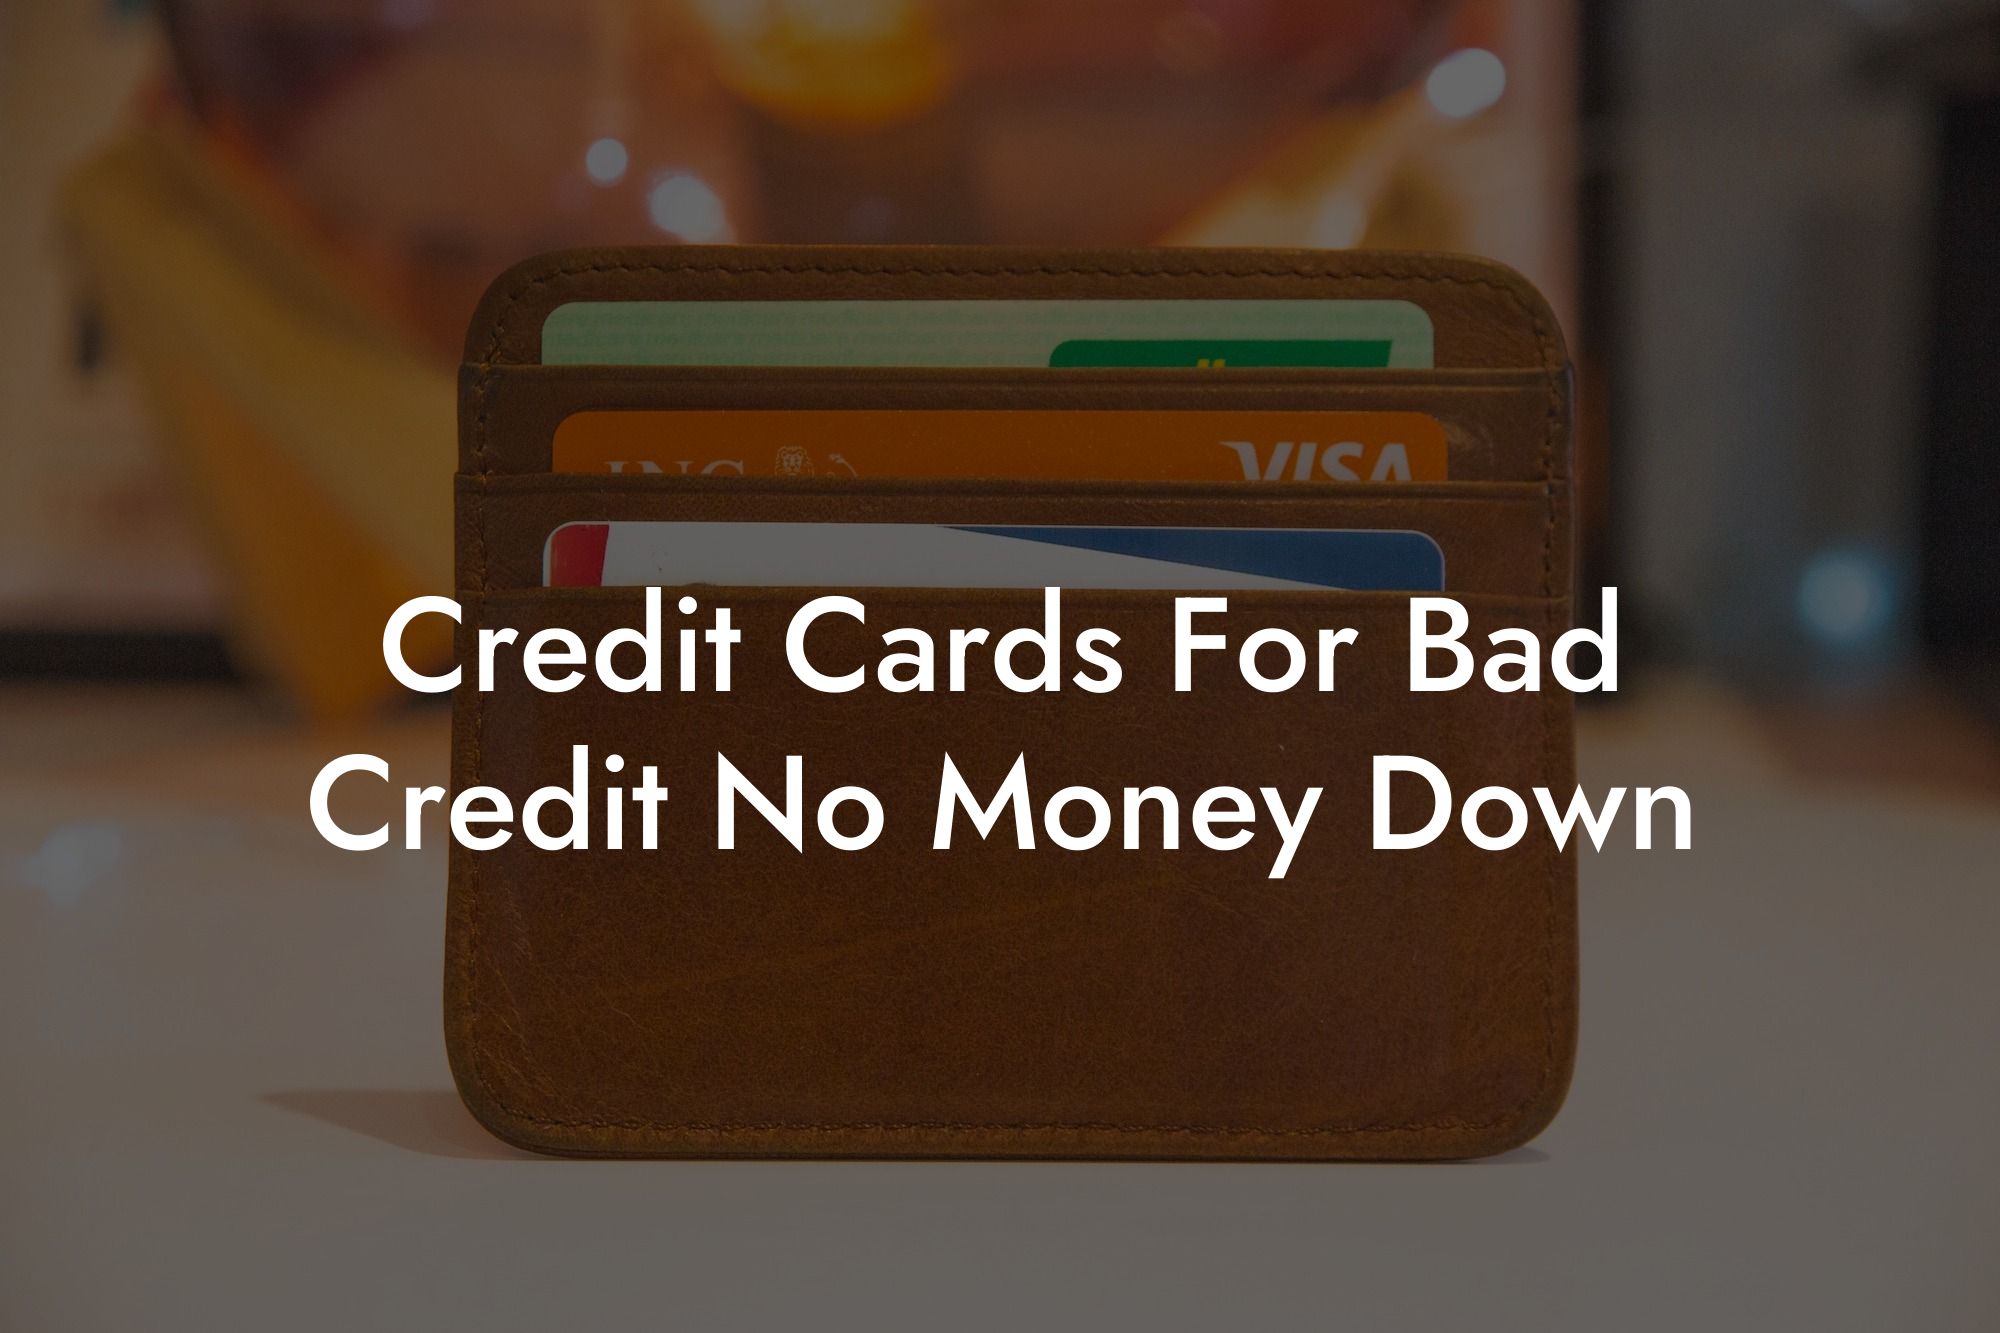 Credit Cards For Bad Credit No Money Down